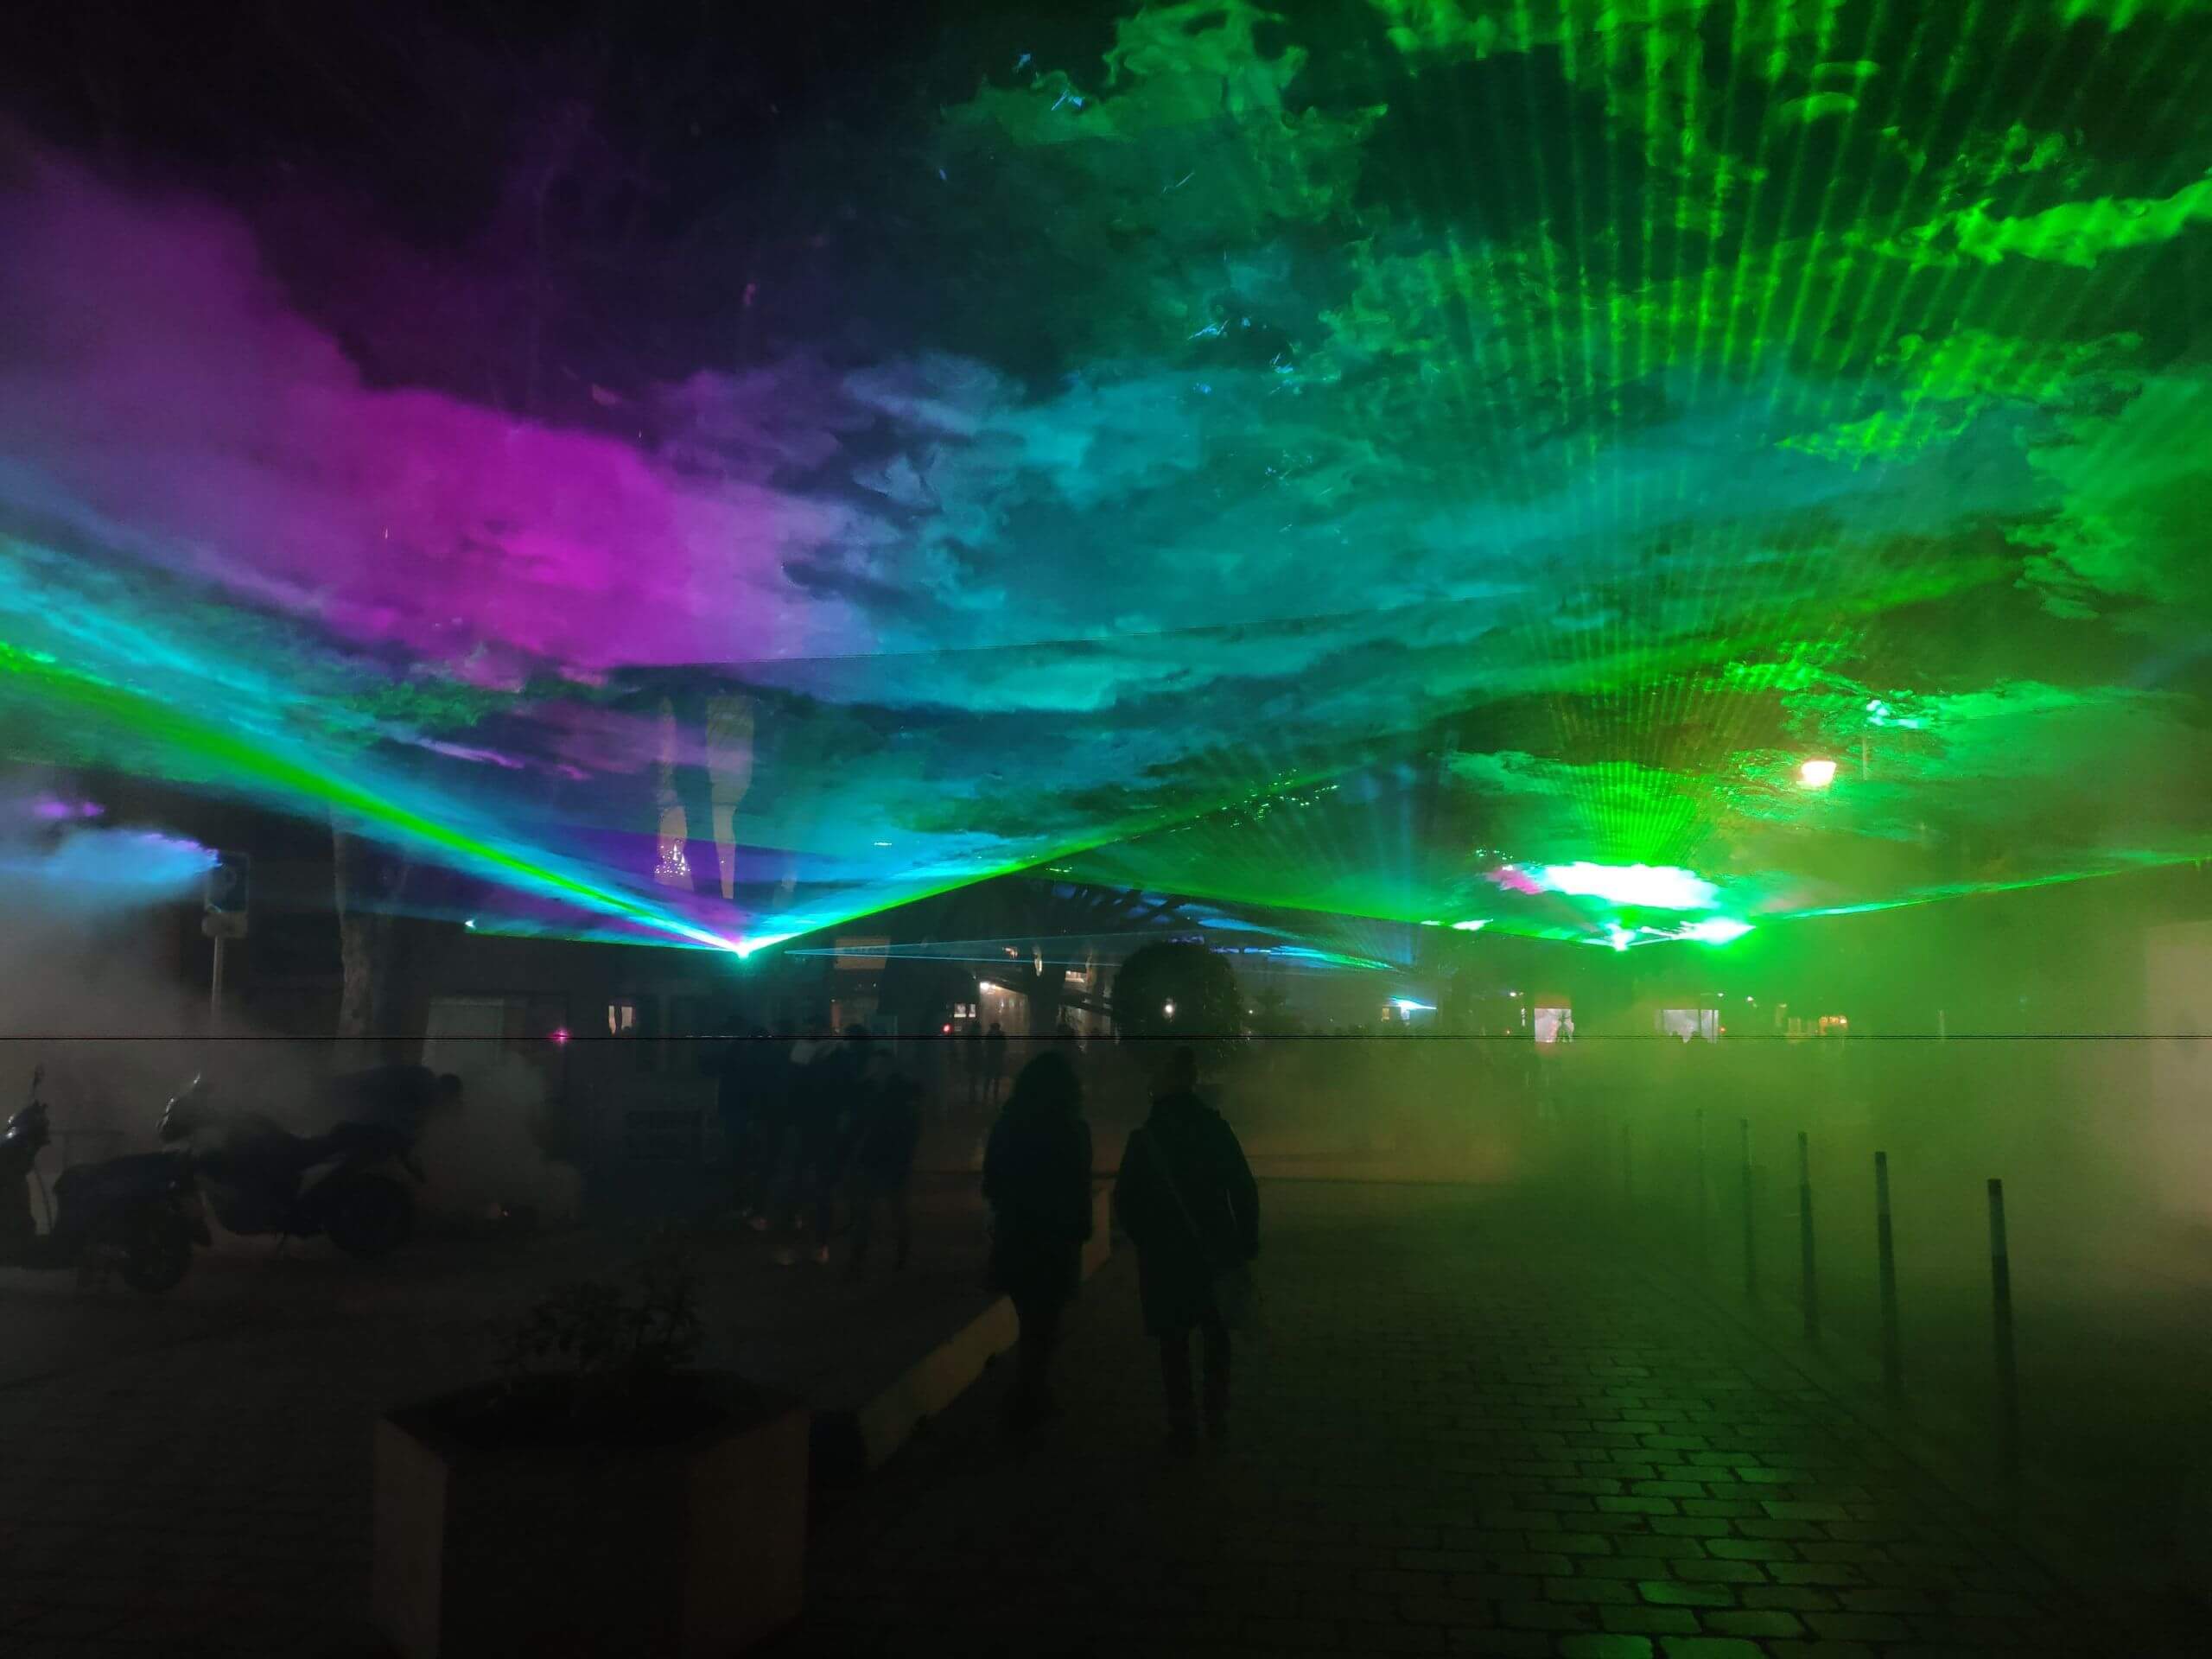 Europe Évènement - Laser show - Photo of a city centre with a blue, green and pink aurora borealis in the sky